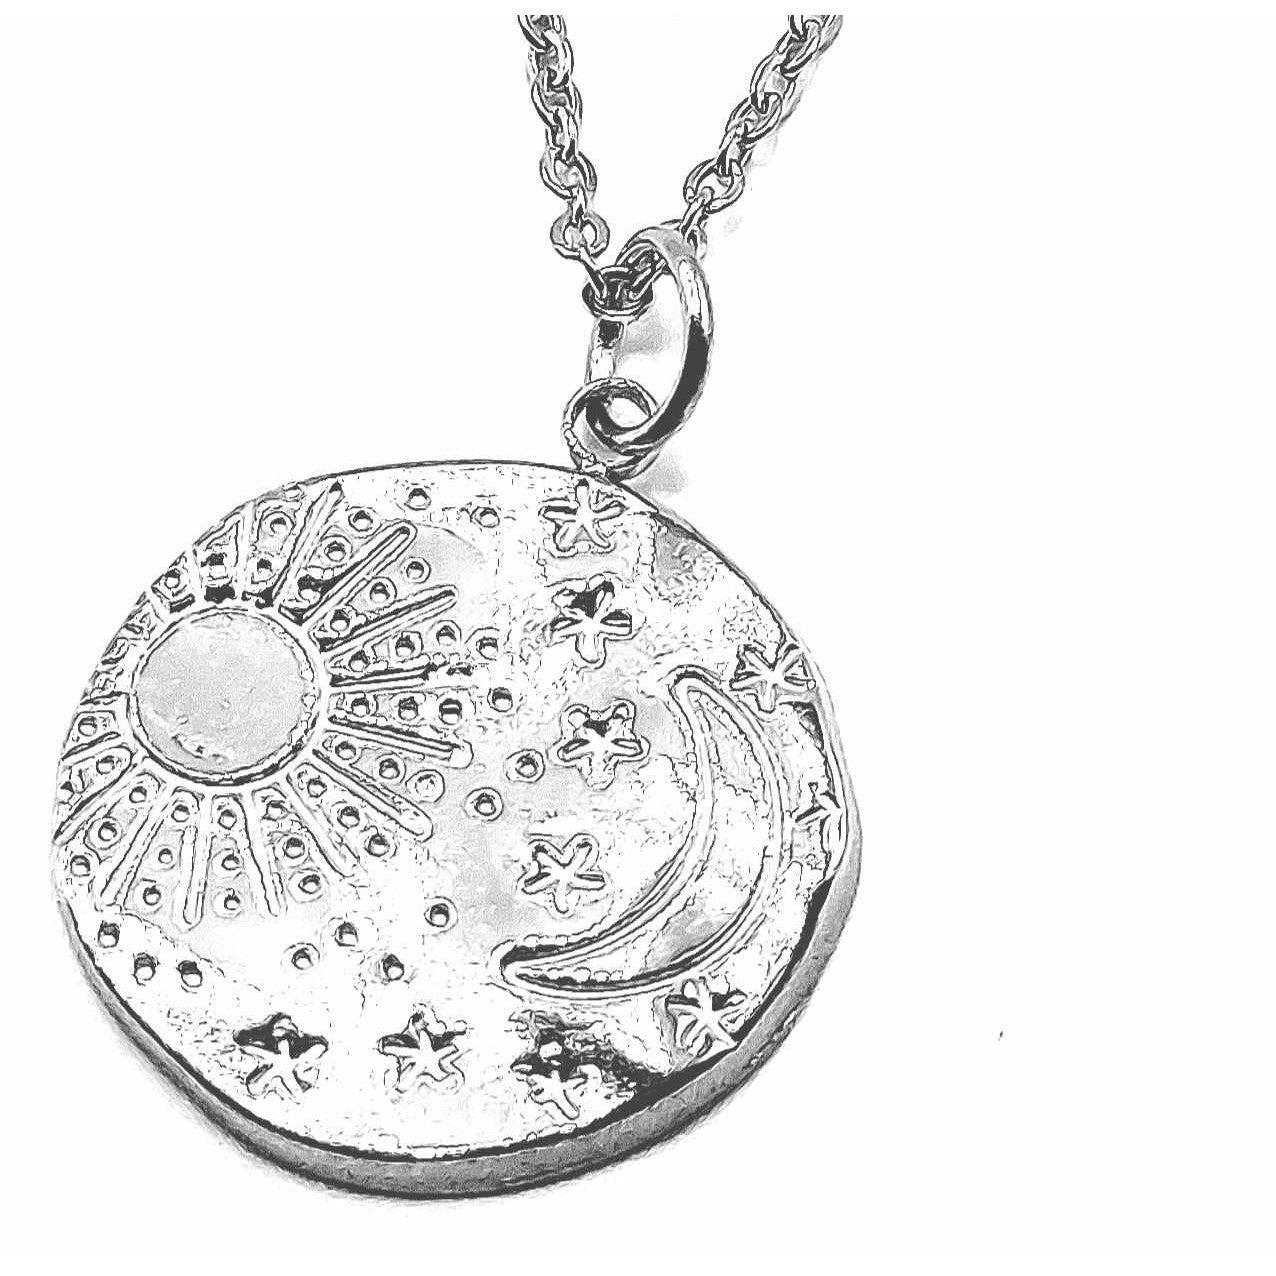 Sun and Stars Uneven Medallion Stainless Steel Necklace | Pretty Silver Pendant on Chain